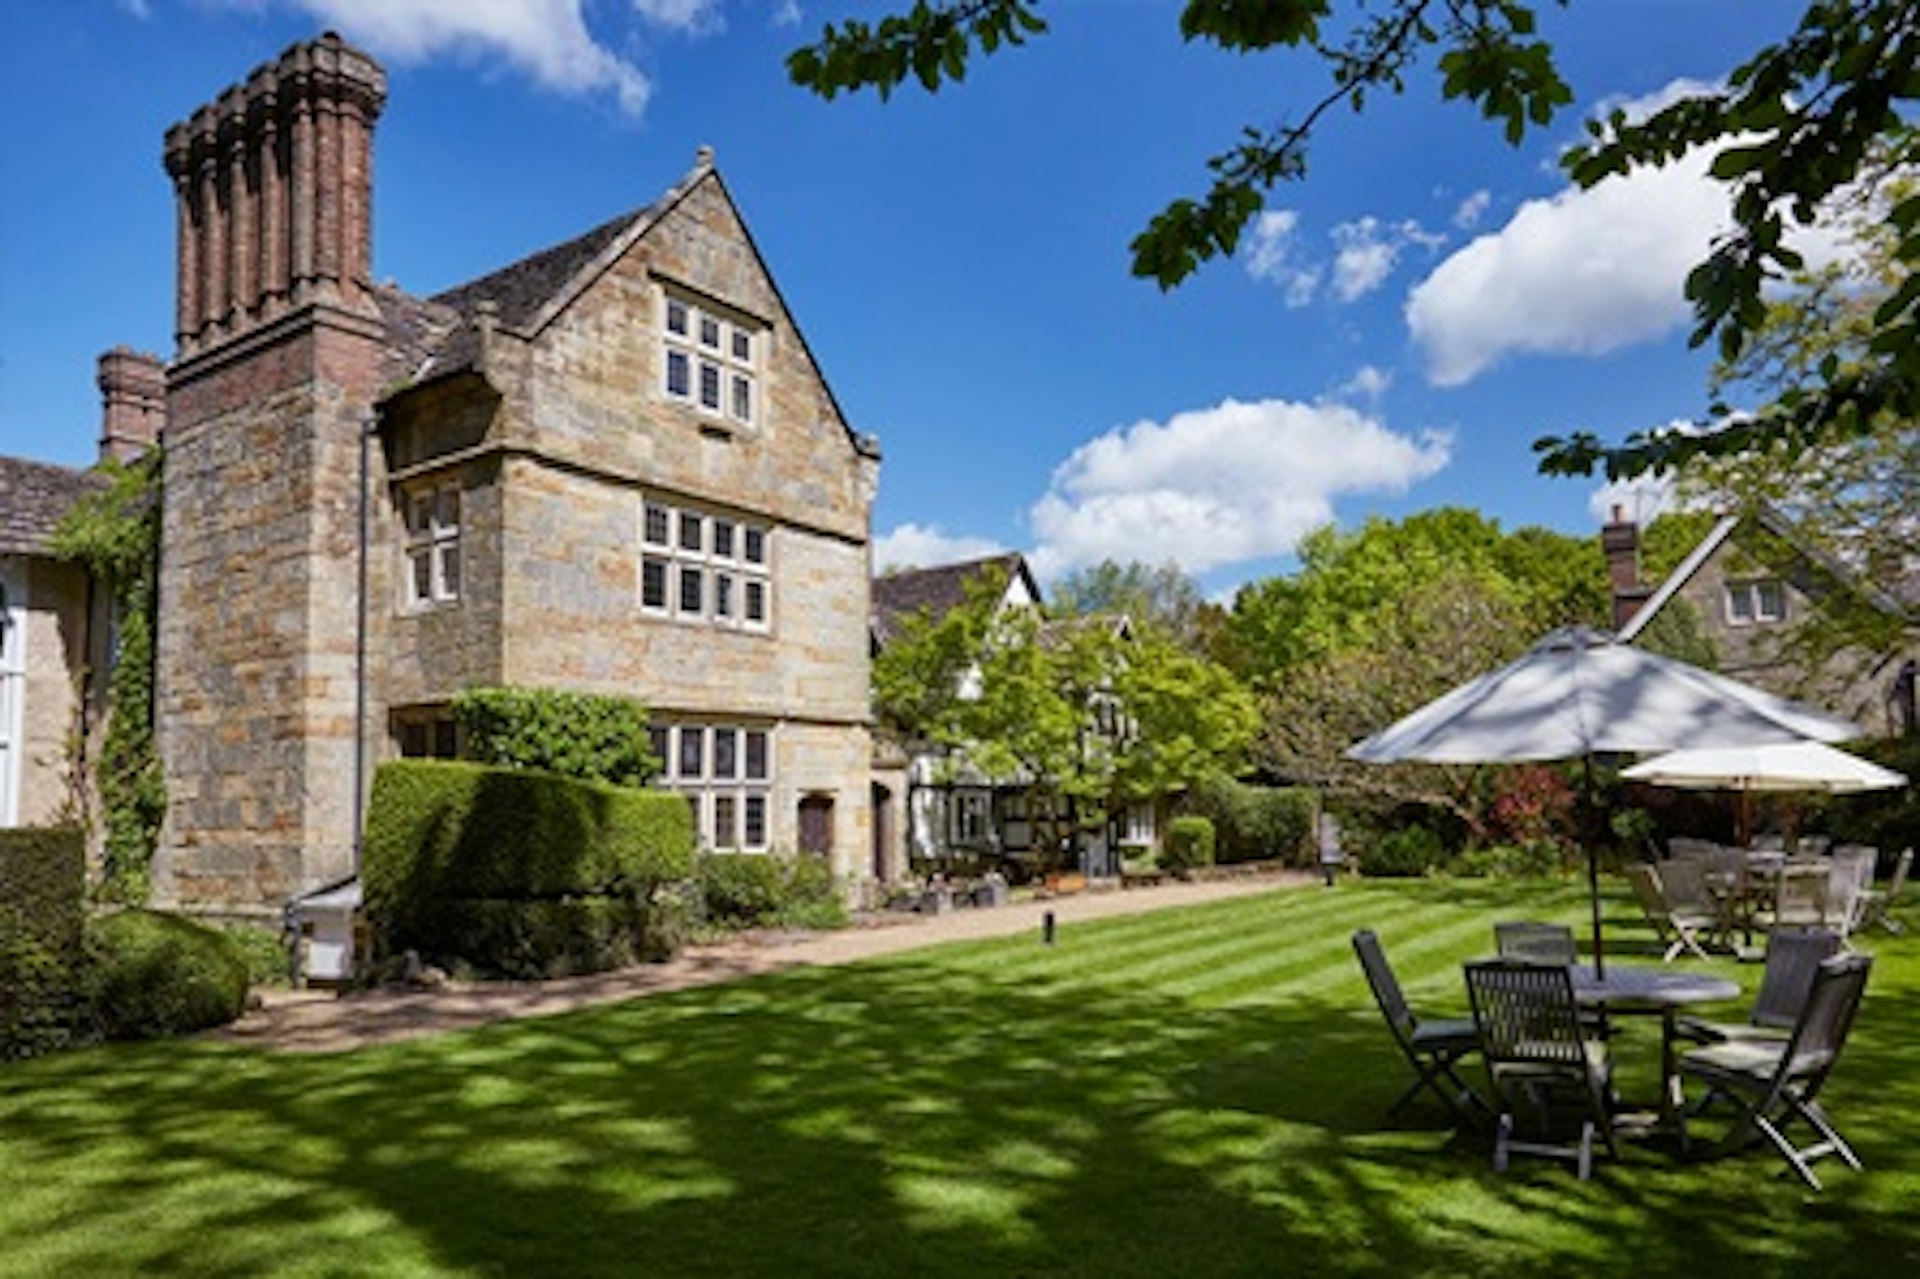 Champagne Afternoon Tea for Two at the Luxury Ockenden Manor Hotel 2